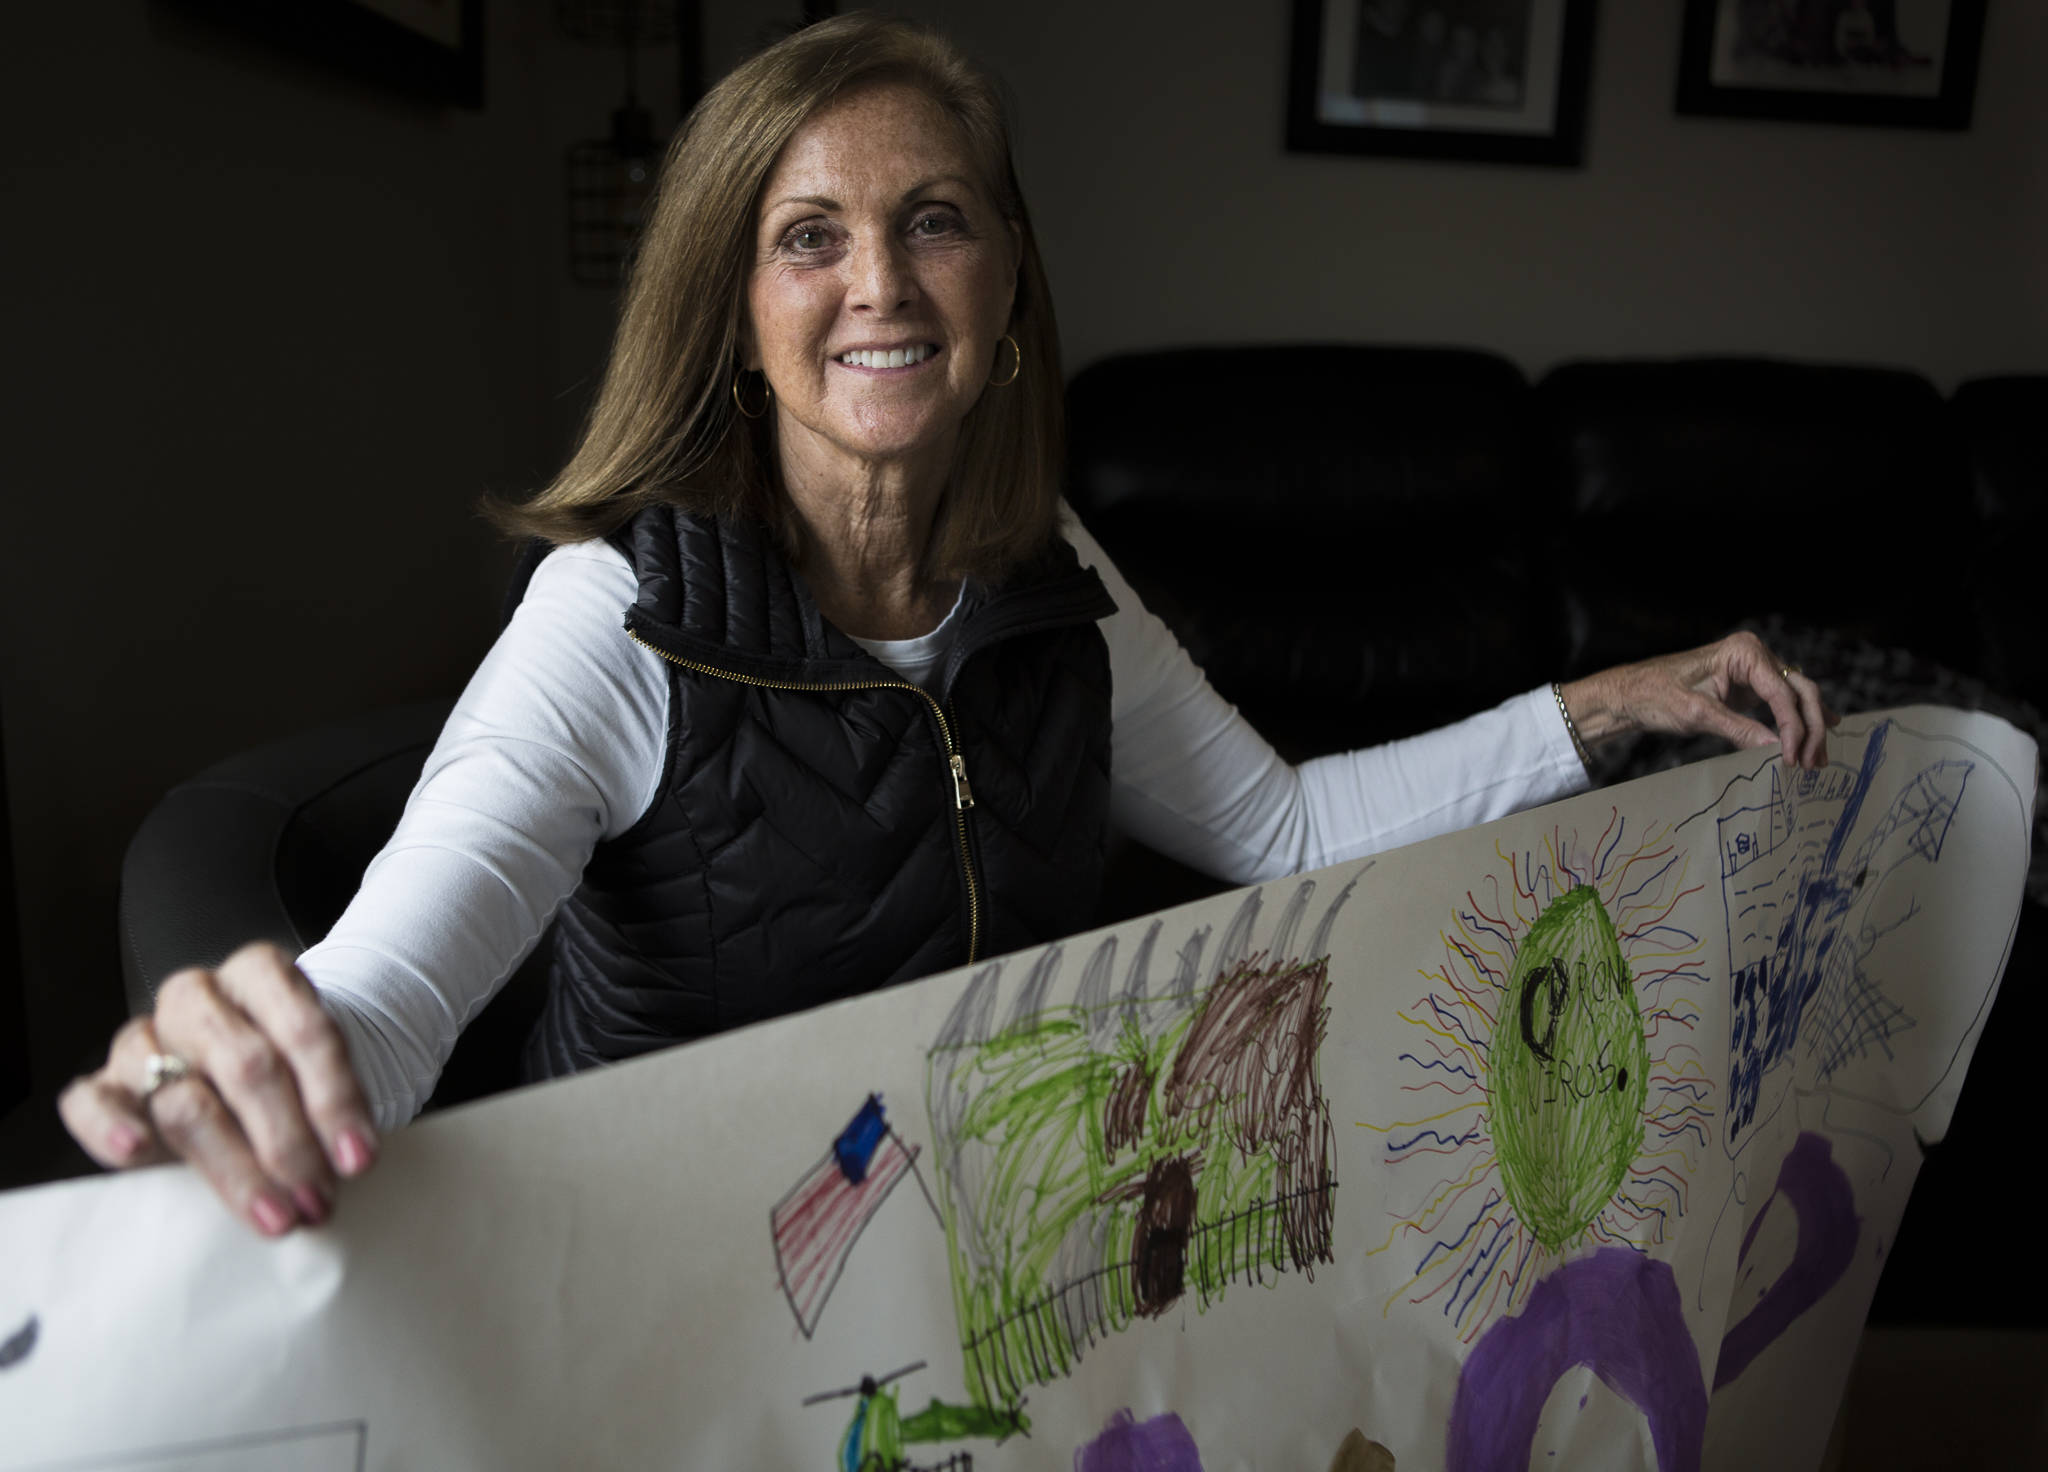 Susan Anabel at her Marysville home with a welcome home sign her grandchildren decorated for her with depictions of the coronavirus, the Diamond Princess cruise ship and the base where she was quarantined. (Olivia Vanni / The Herald)